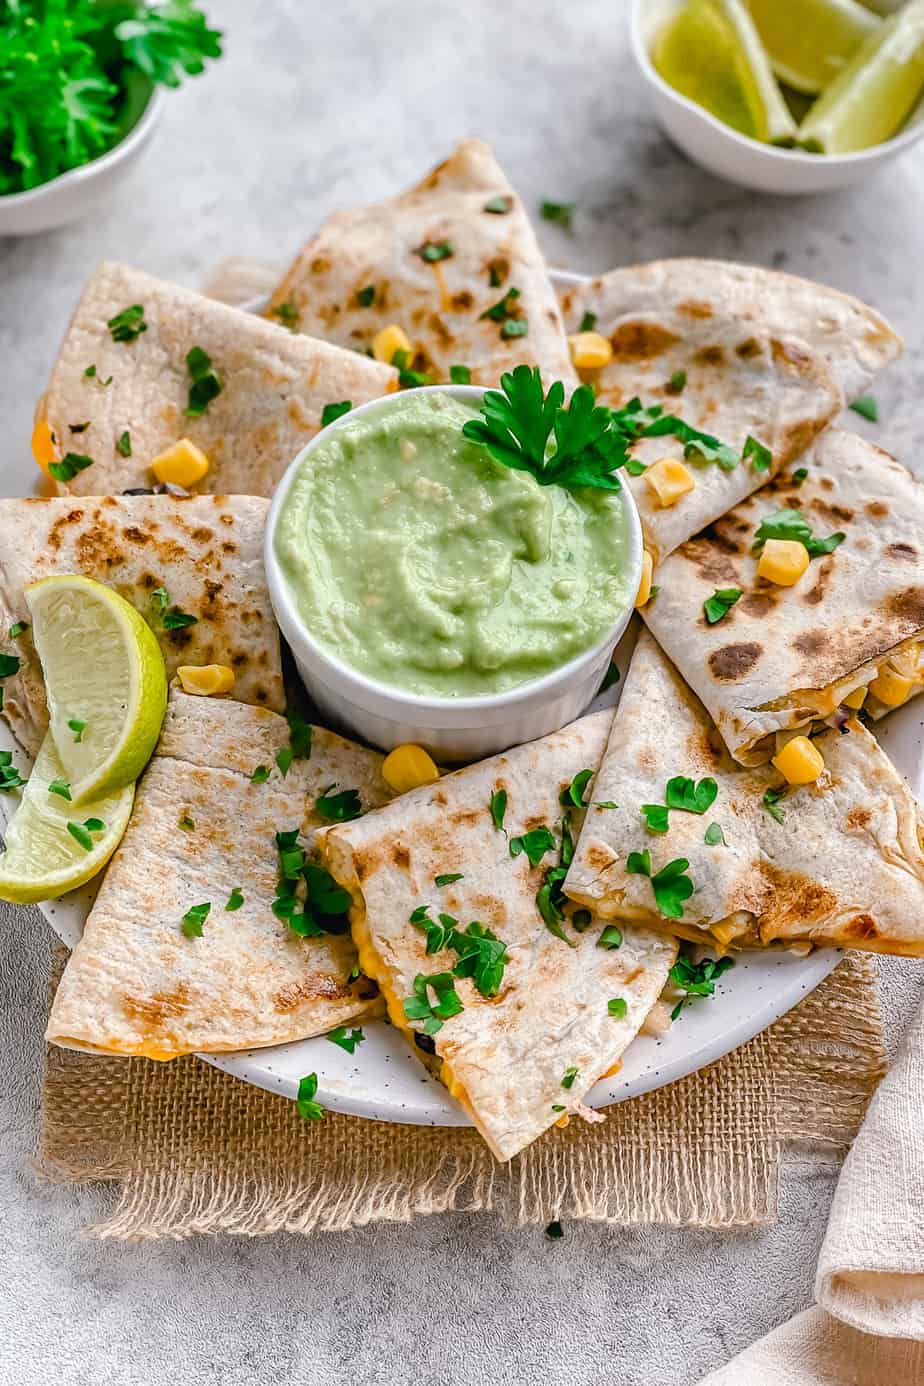 These Mexican Quesadillas are loaded with black beans, sweet corn, and two kinds of gooey melted cheese. Soft tortillas are then lightly toasted on a skillet until crisp. You’ll love this recipe as they make a great hearty lunch or easy dinner in just under 30 minutes.